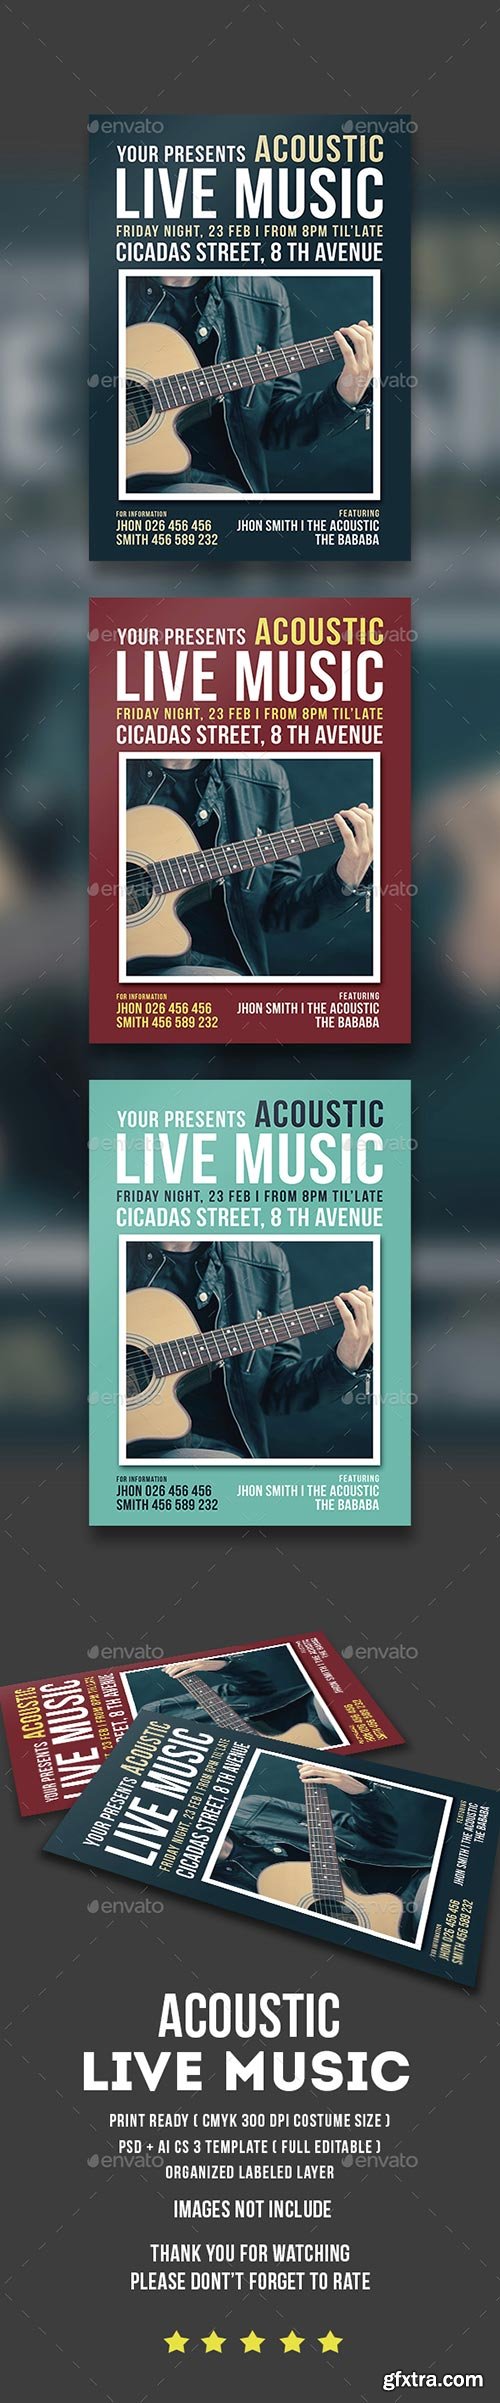 Graphicriver - Acoustic Live Music Flyer 14604101